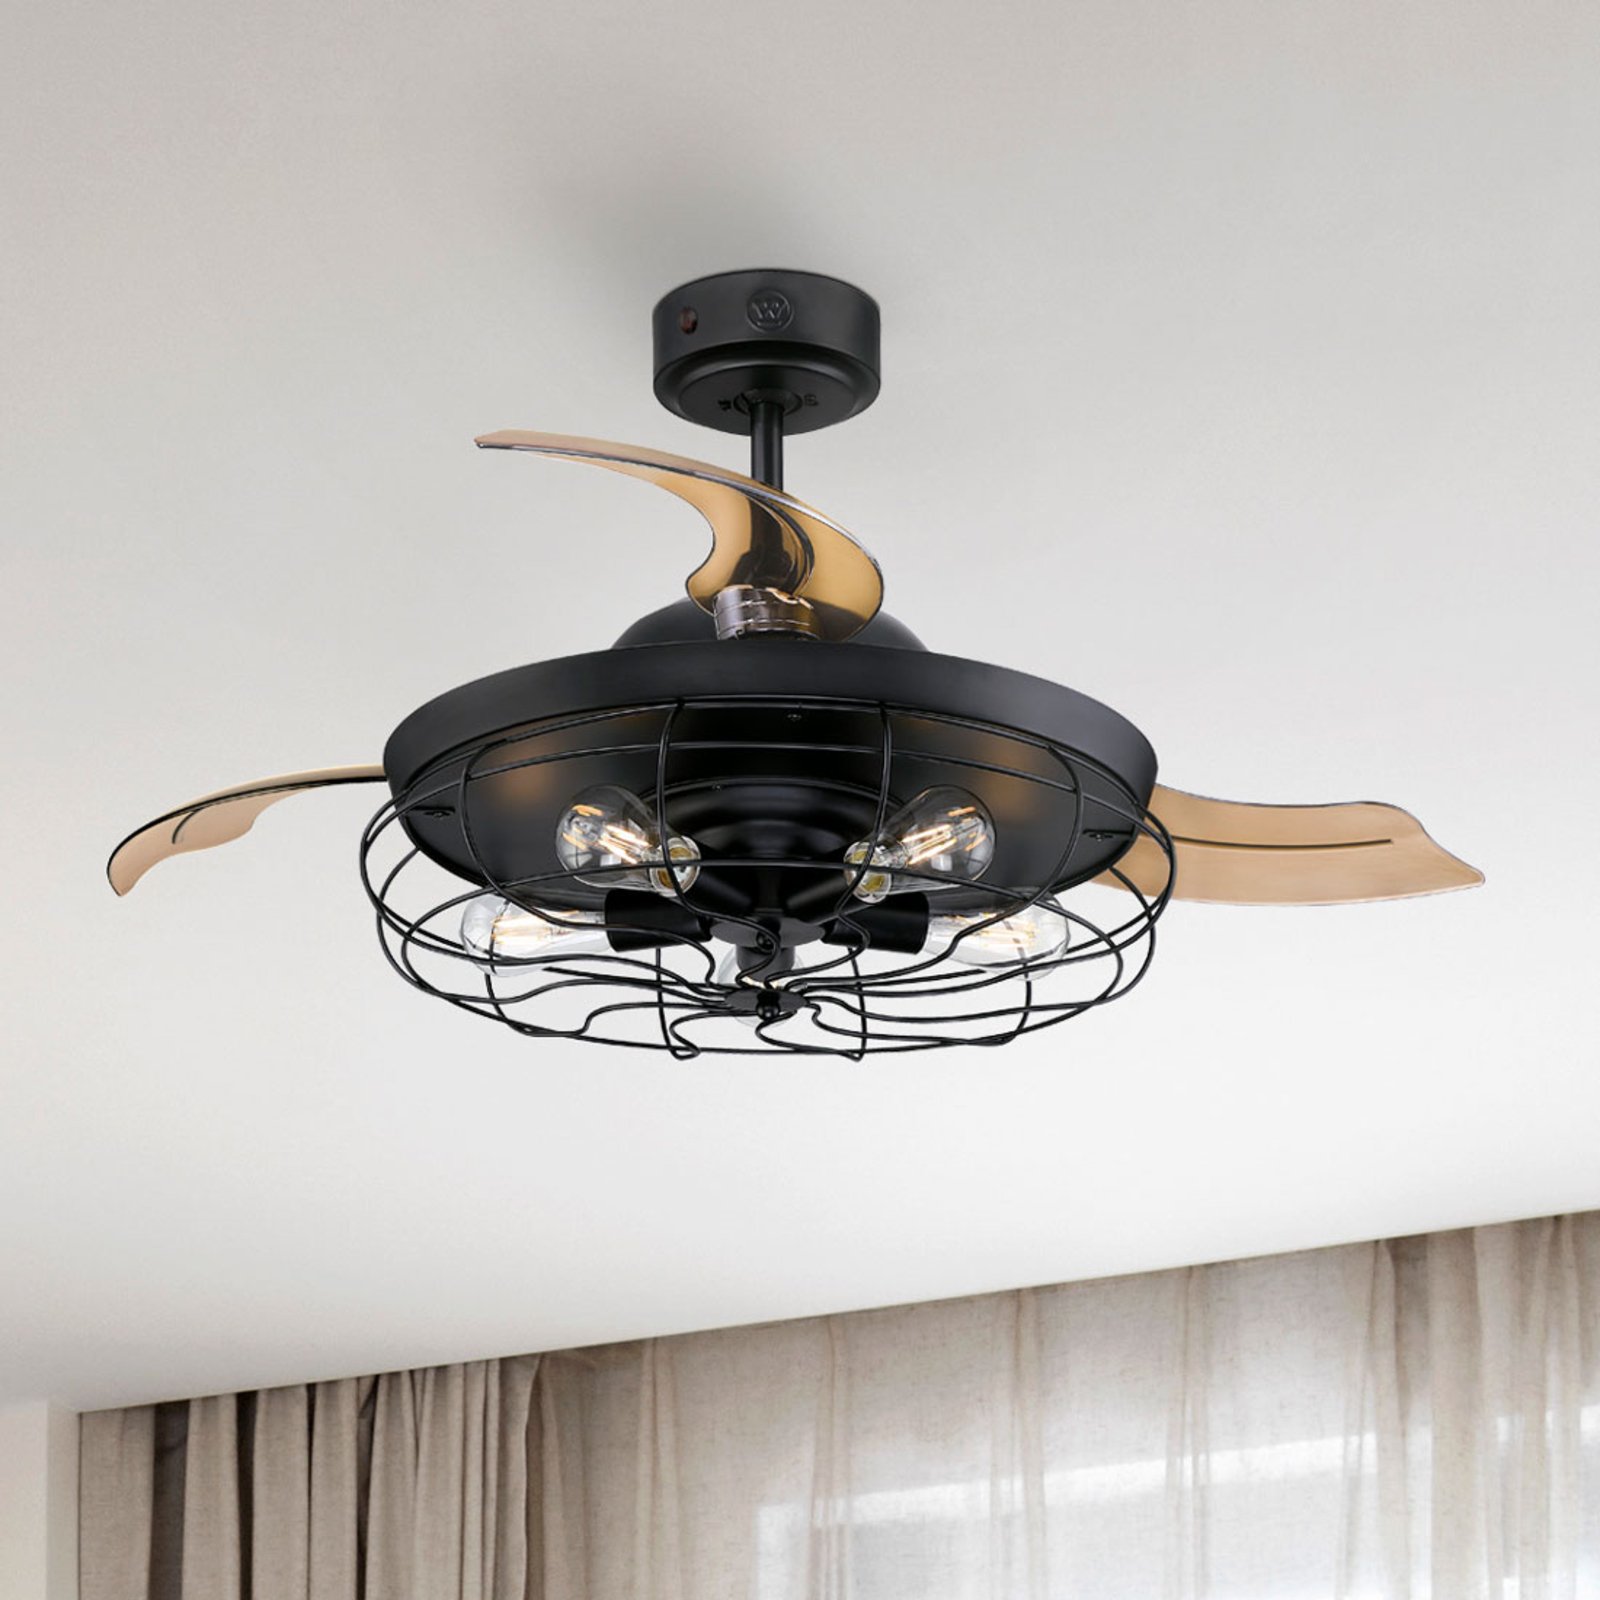 Westinghouse Dunlin ceiling fan with light